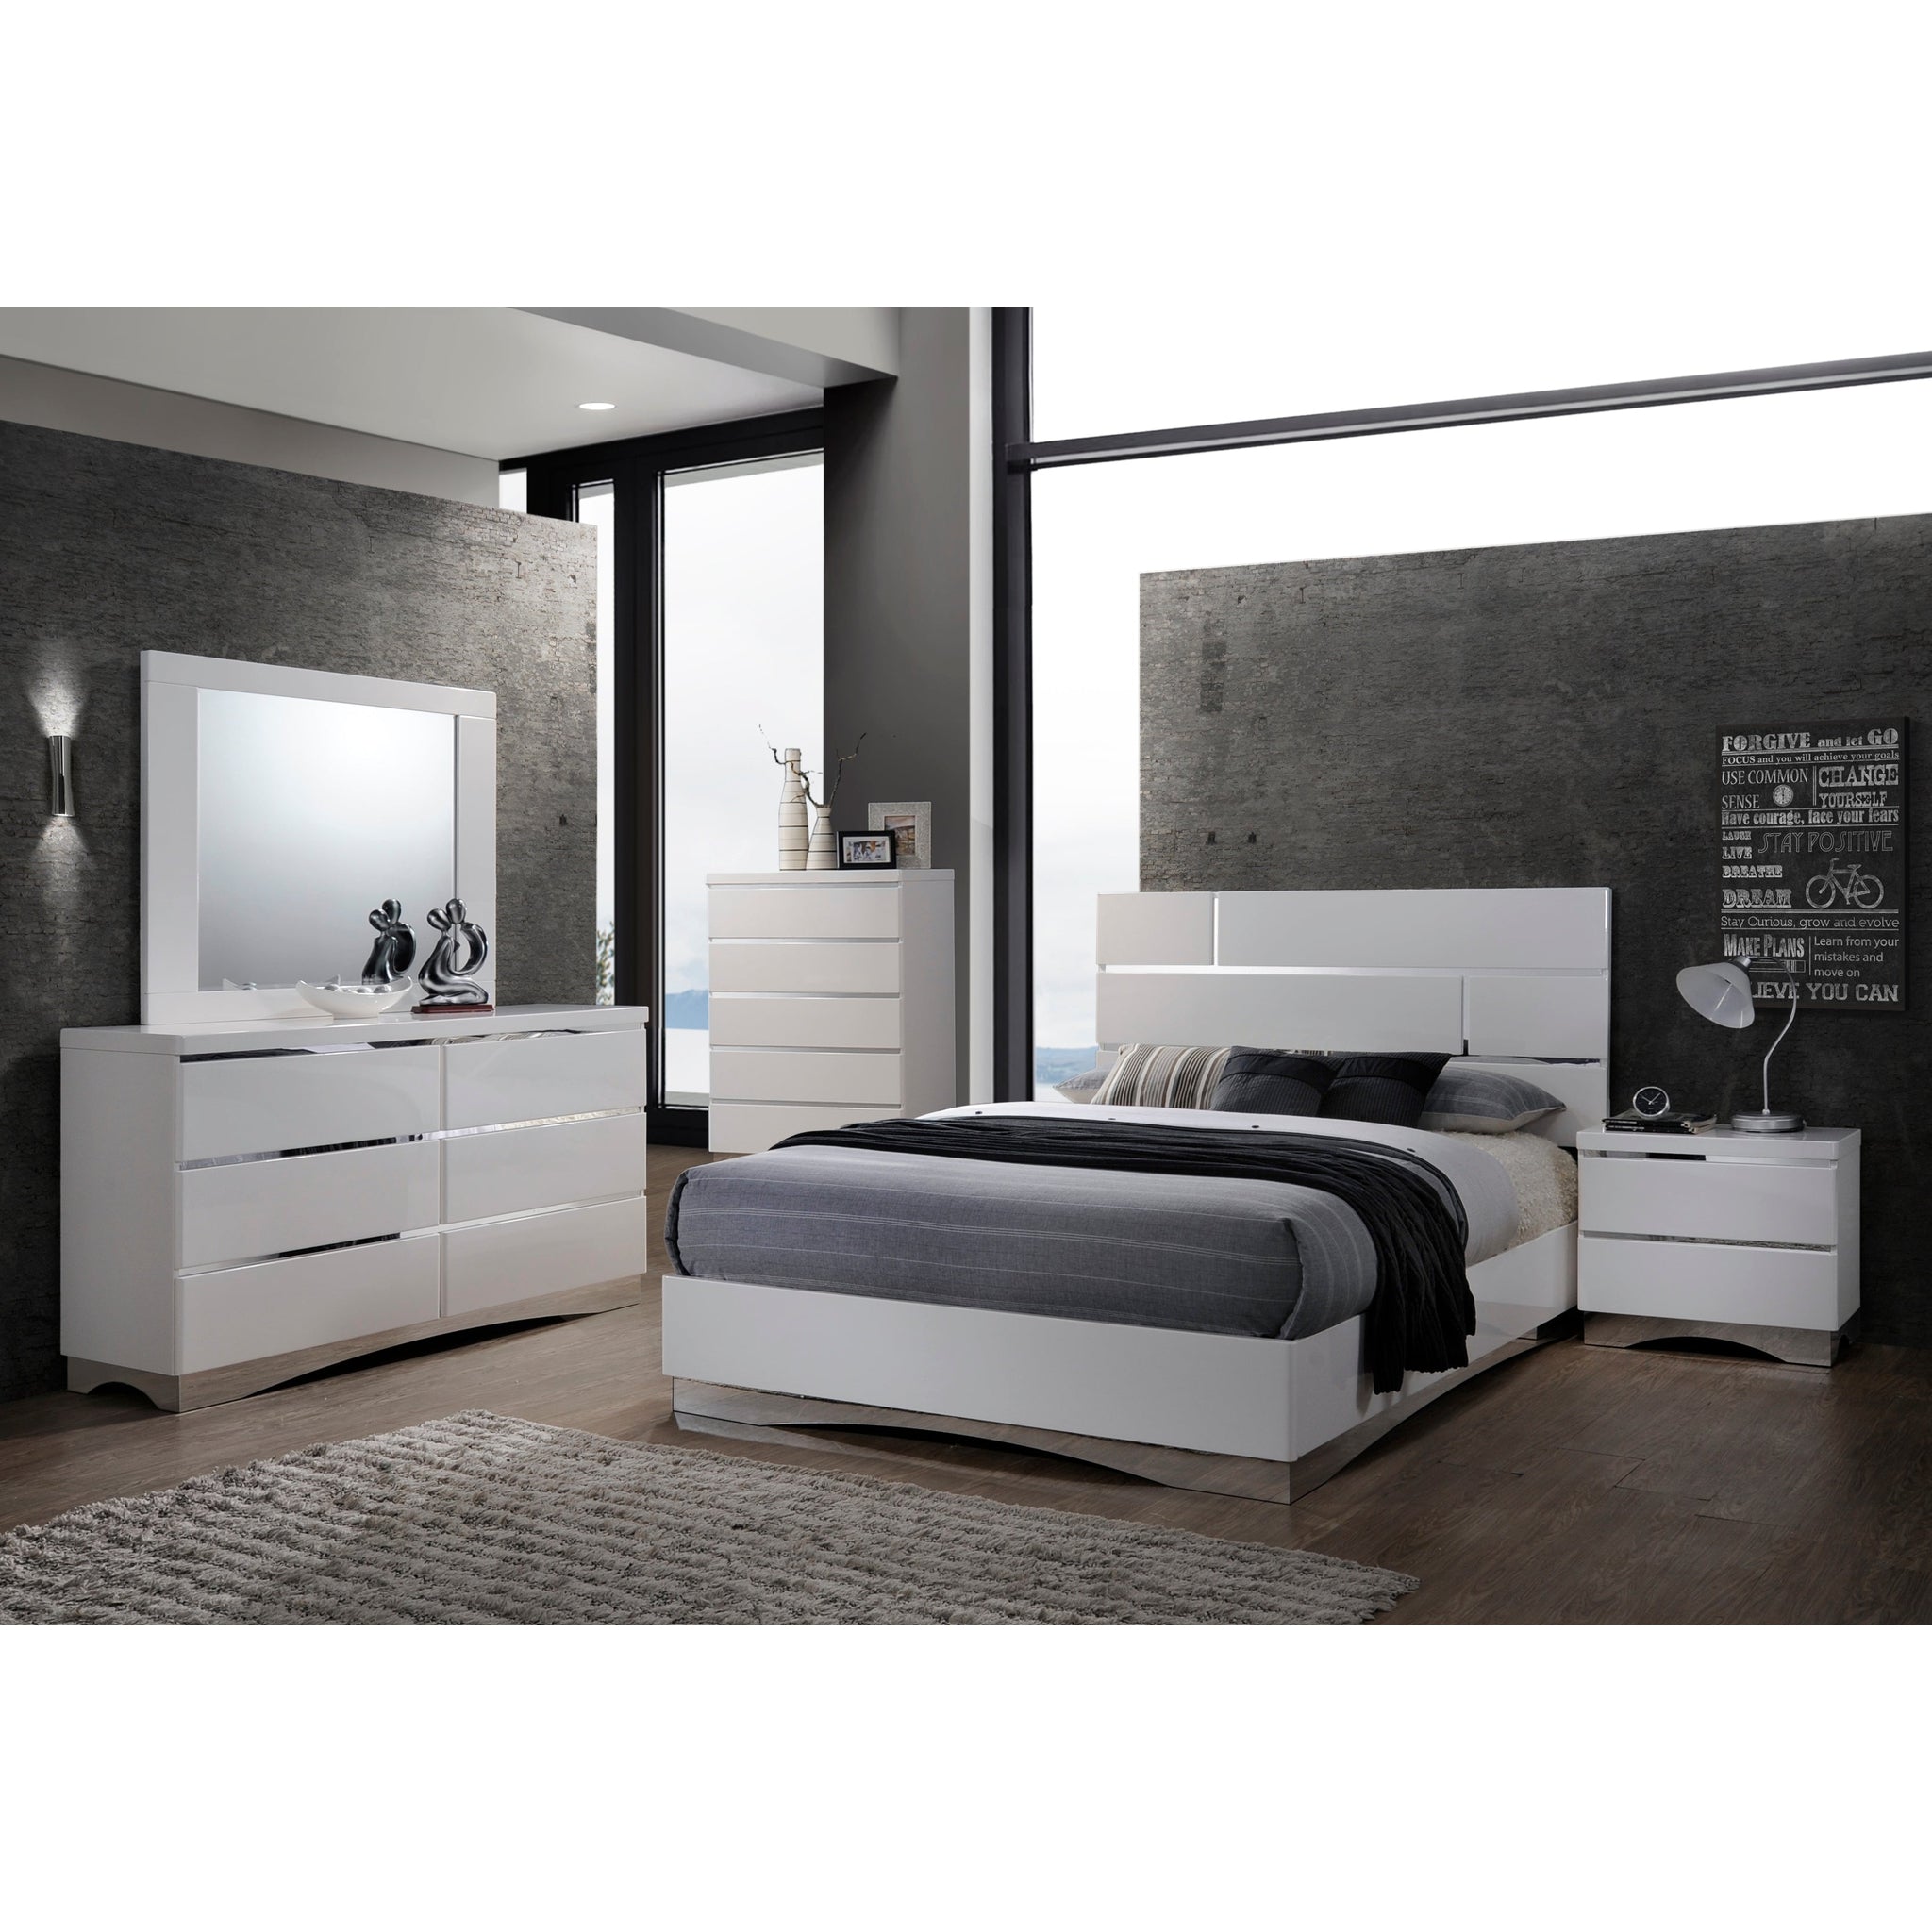 Chic, Modern, and Inviting Crescent Quest King Size Bed Set – Interwood